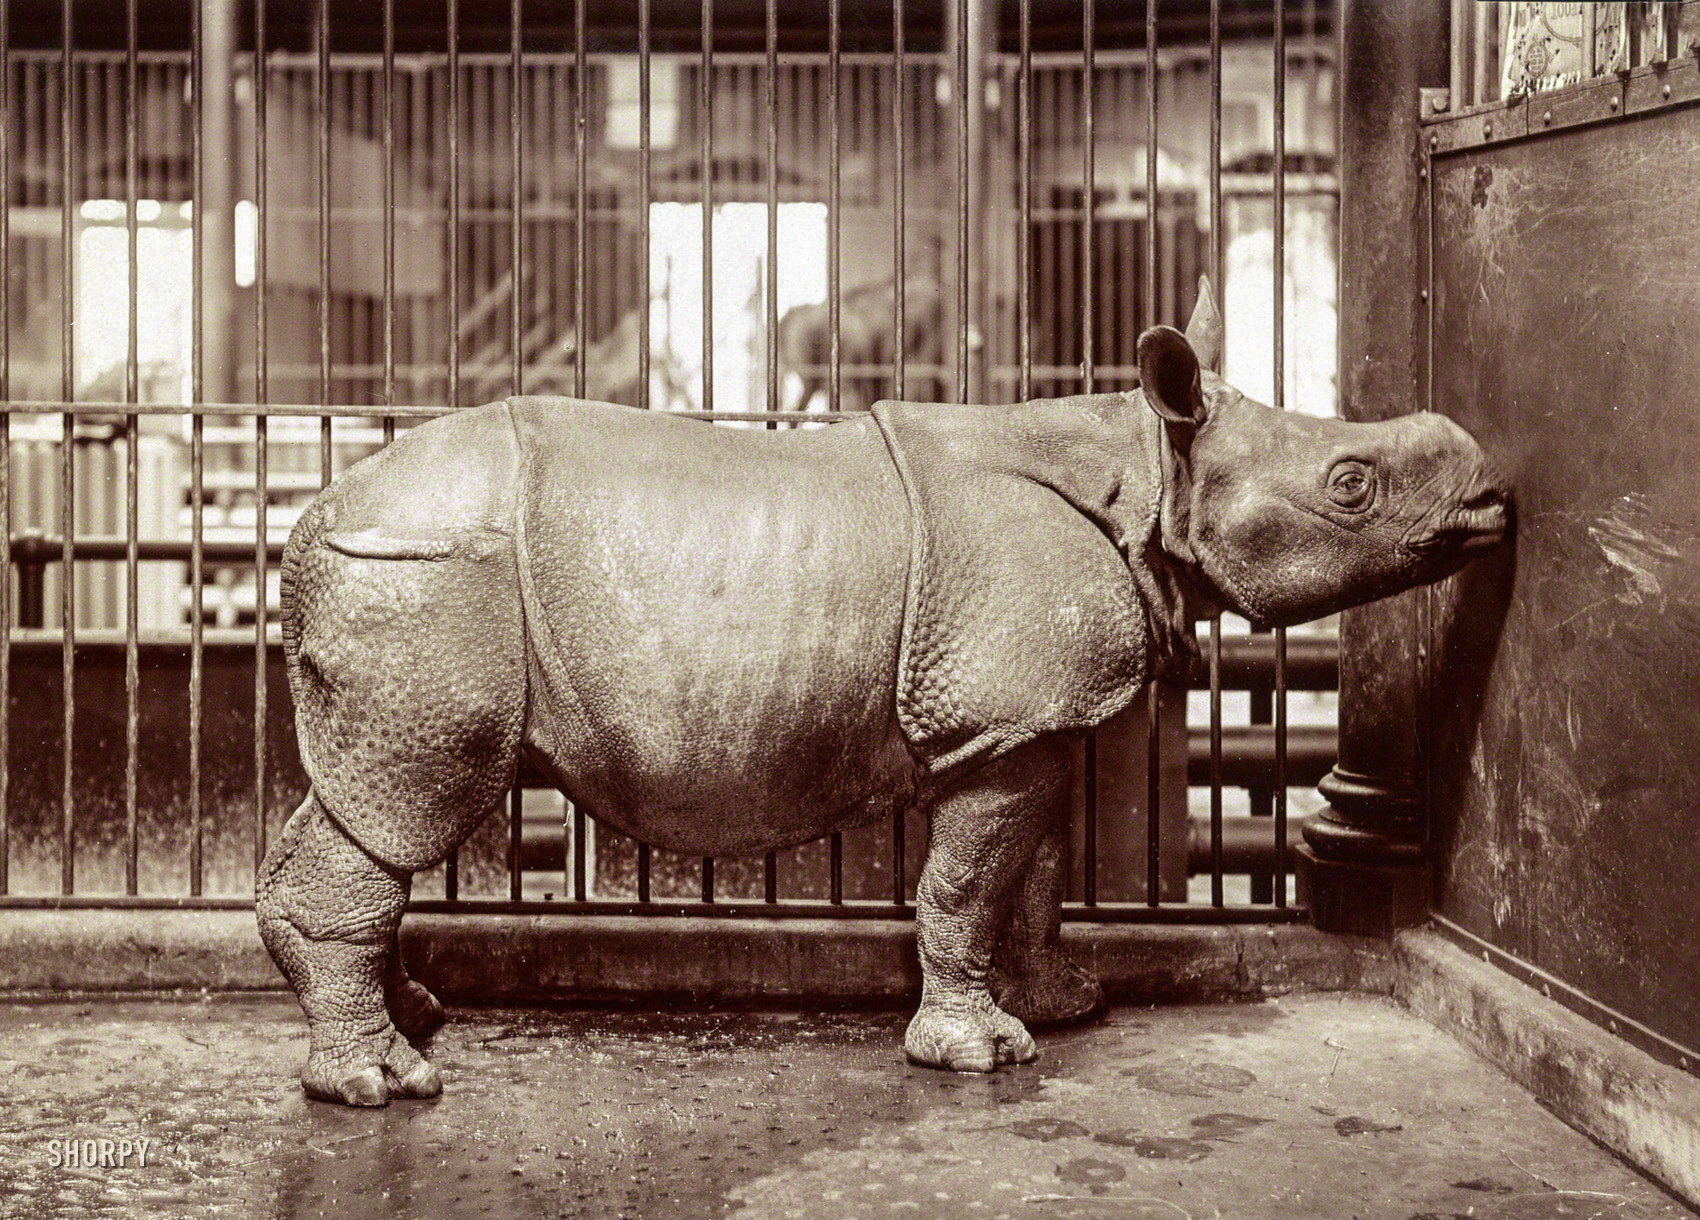 Circa 1910. "Rhinoceros at the New York Zoological Park." View full size.